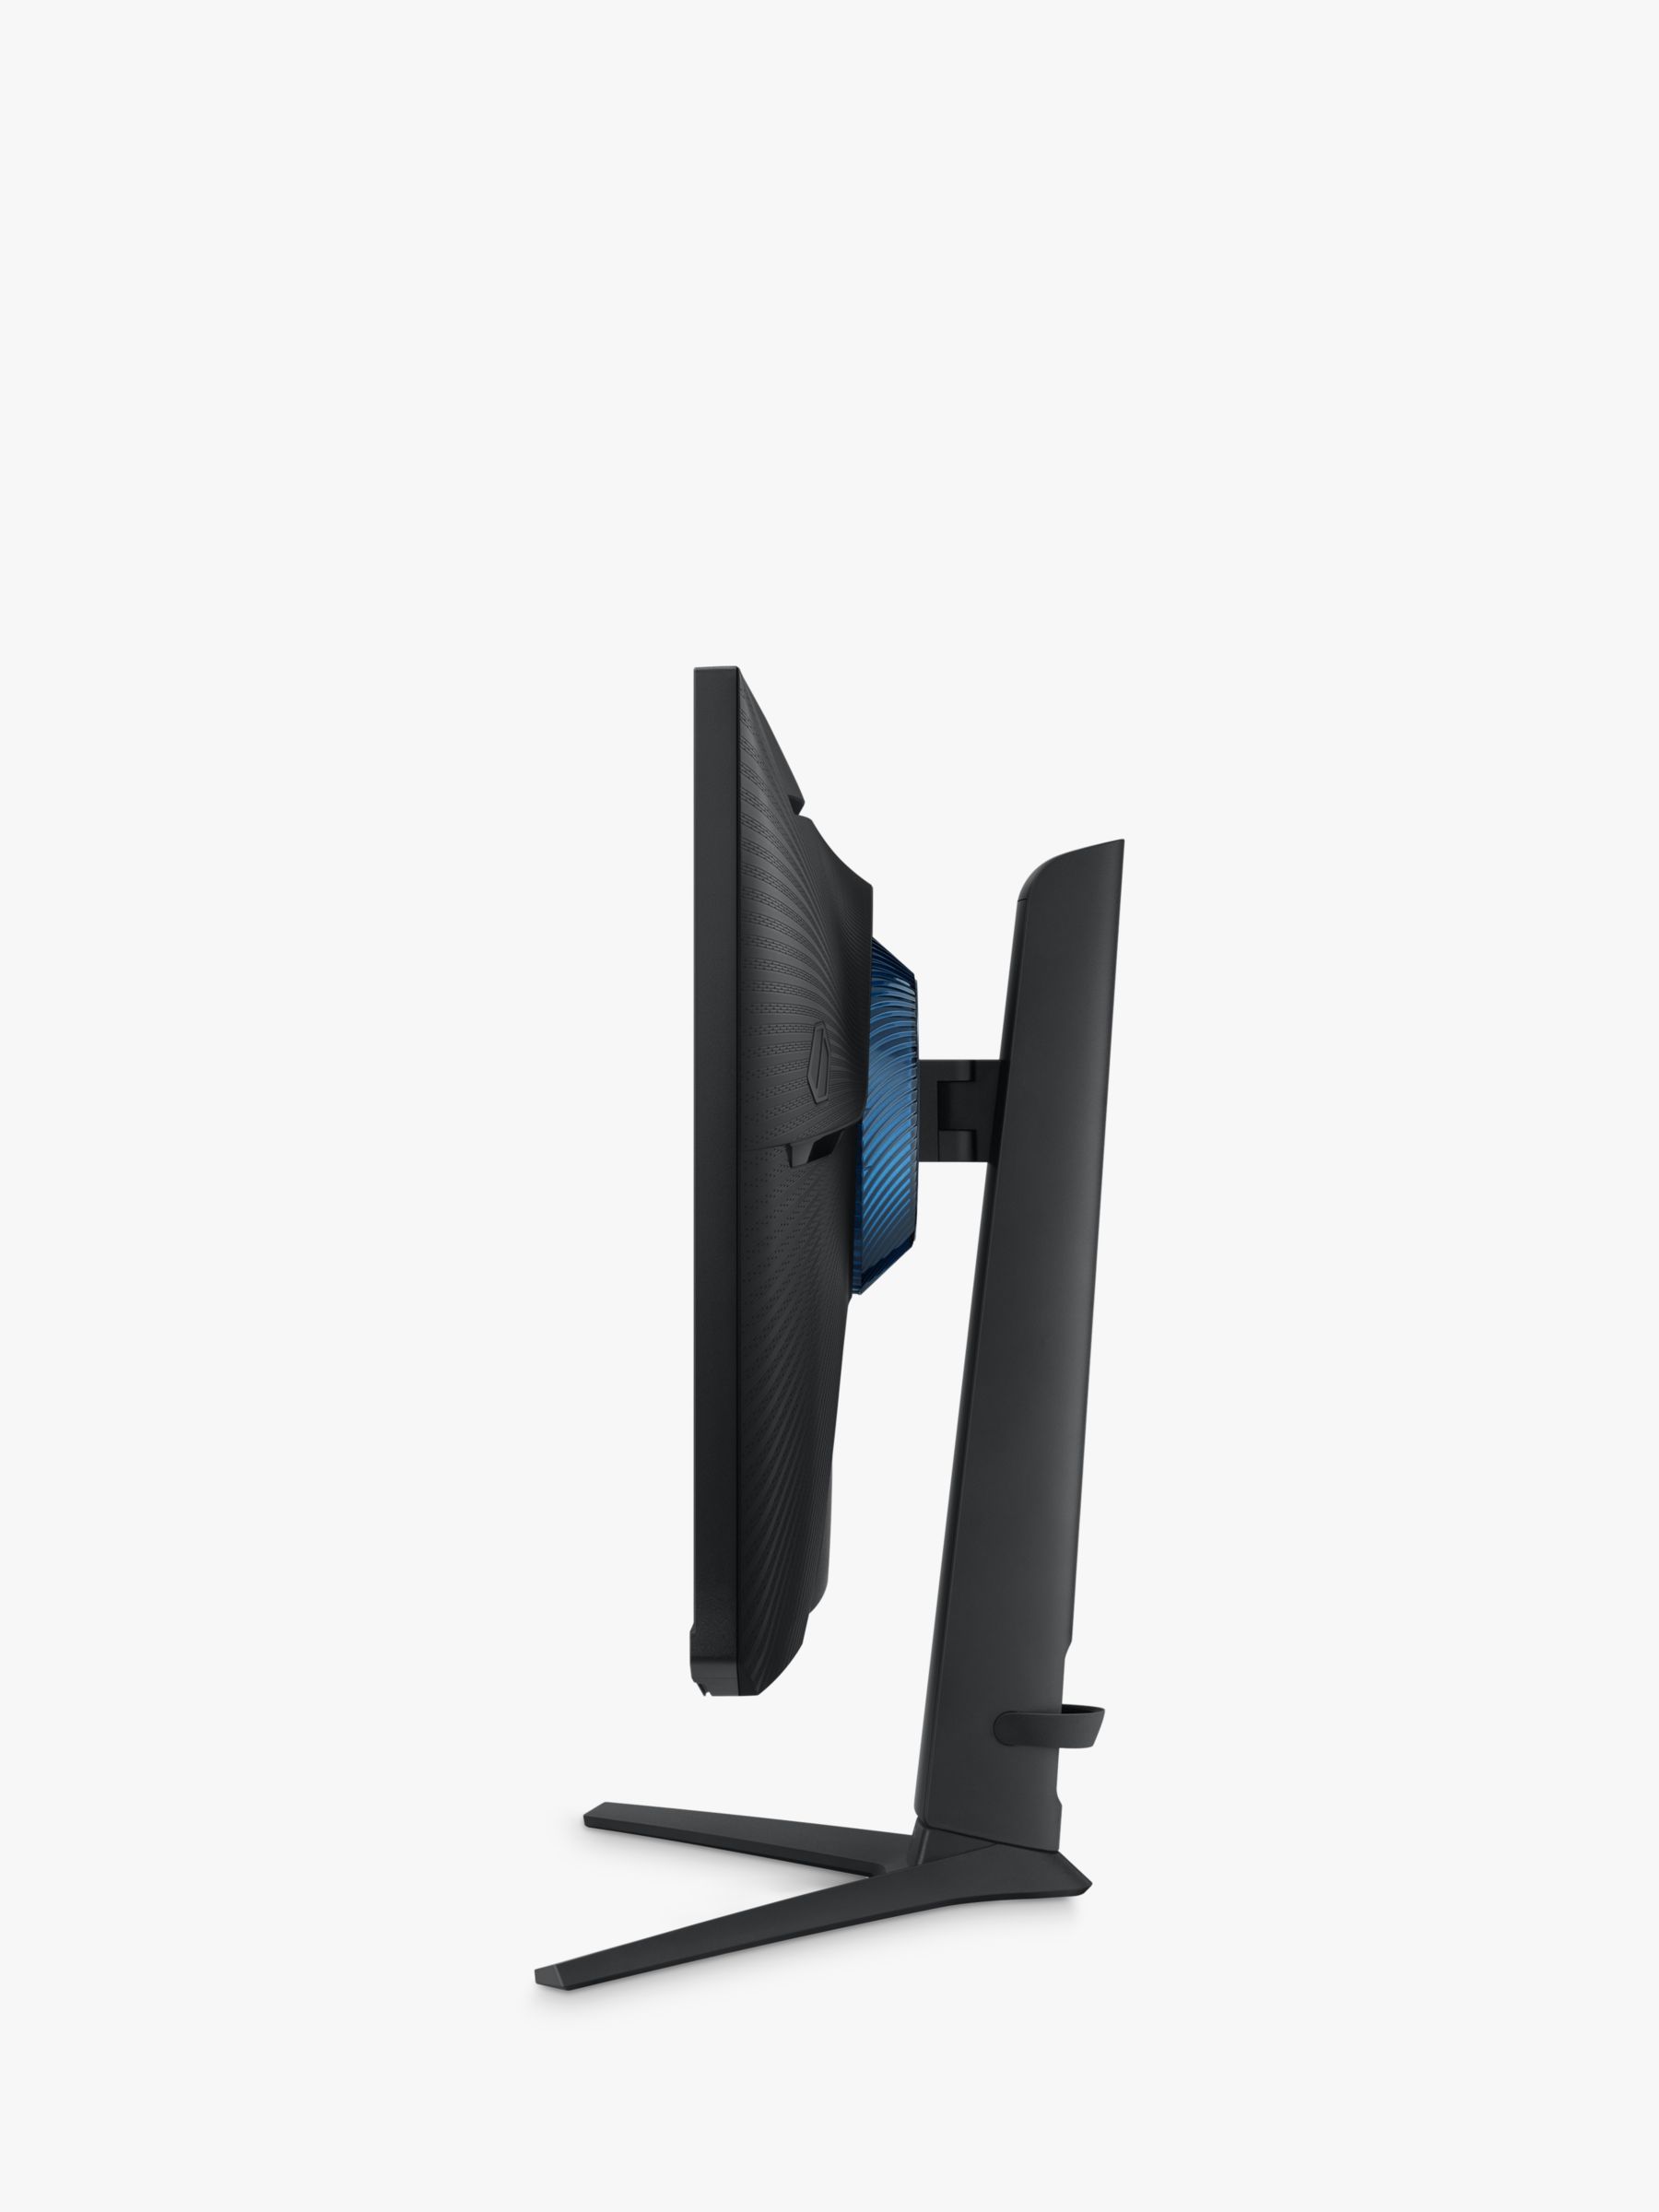 Samsung odyssey G4 FHD 27 inch gaming monitor, Computers & Tech